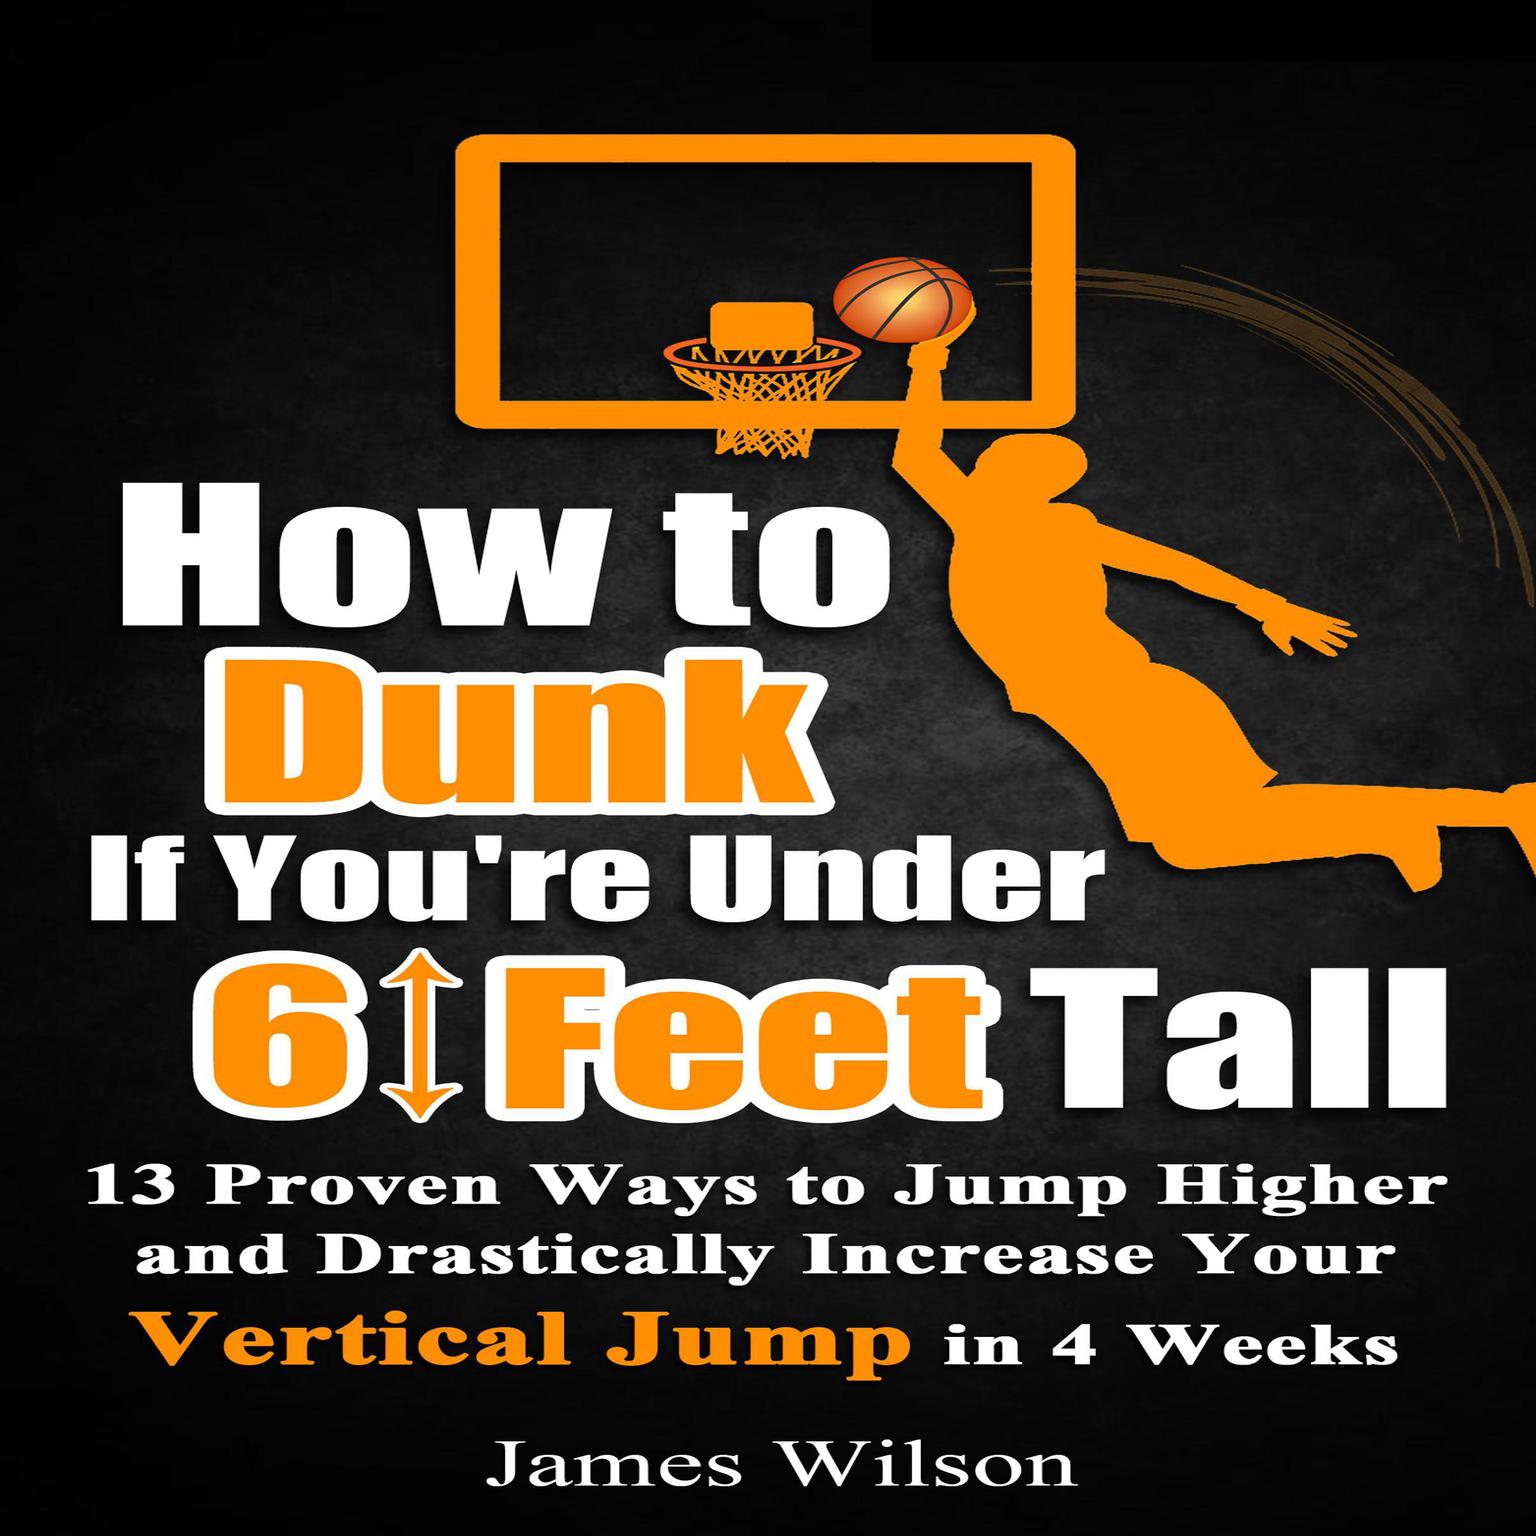 How to Dunk if You’re Under 6 Feet Tall: 13 Proven Ways to Jump Higher and Drastically Increase Your Vertical Jump in 4 Weeks Audiobook, by James Wilson